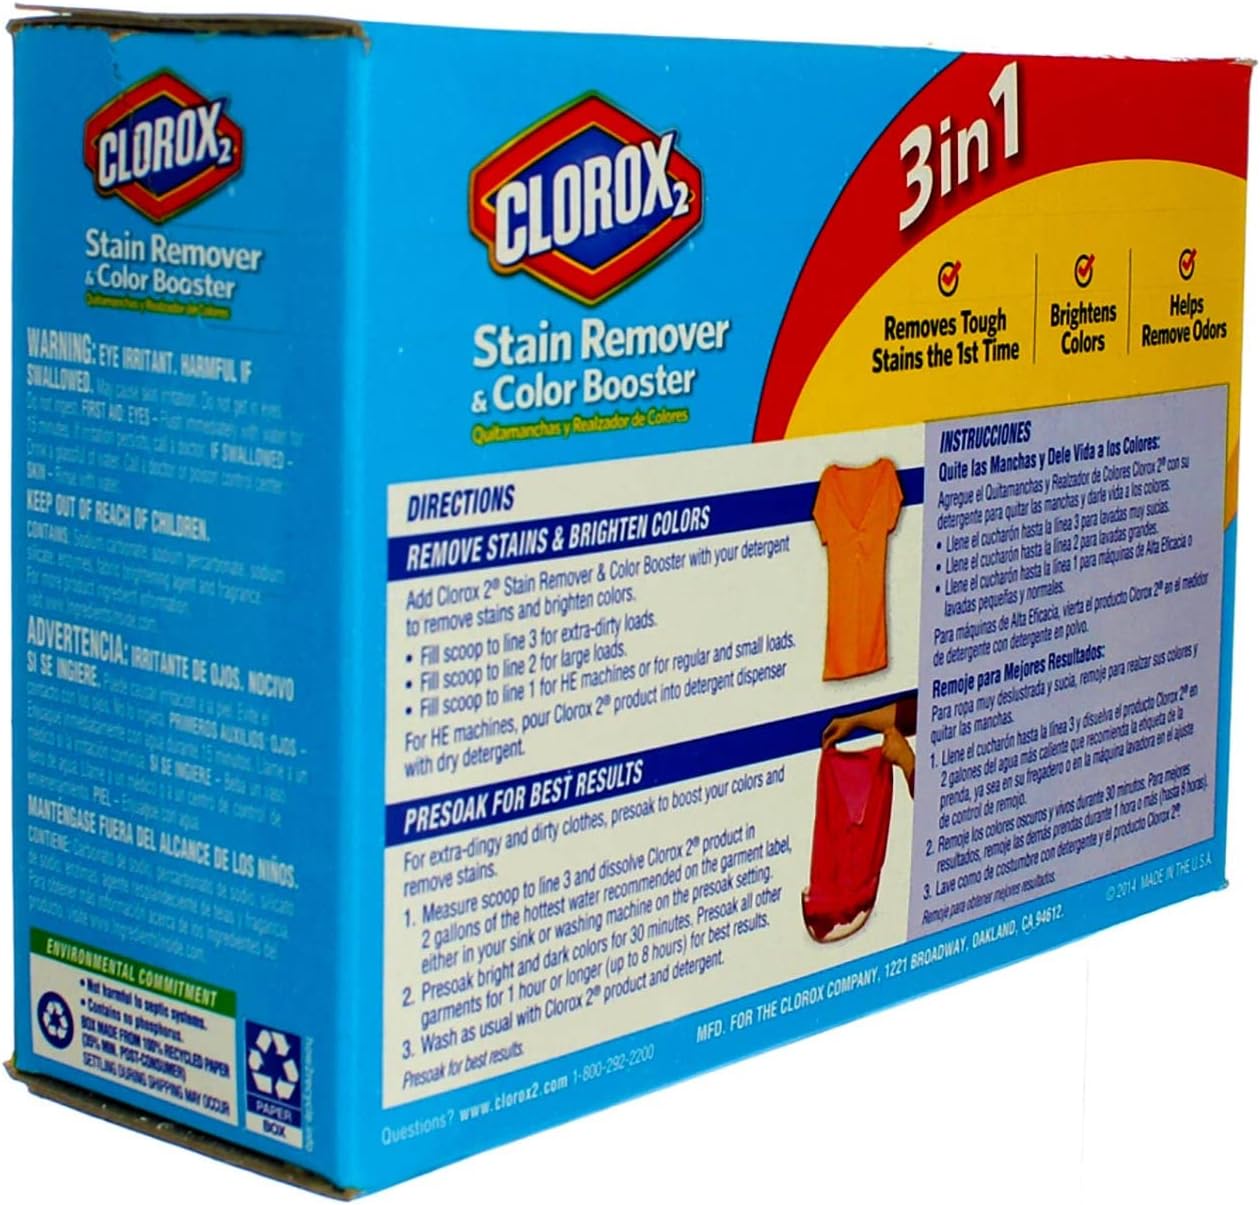 Clorox 2 Laundry Stain Remover and Color Booster Powder, 49.2 Ounce (Pack of 2) : Health & Household